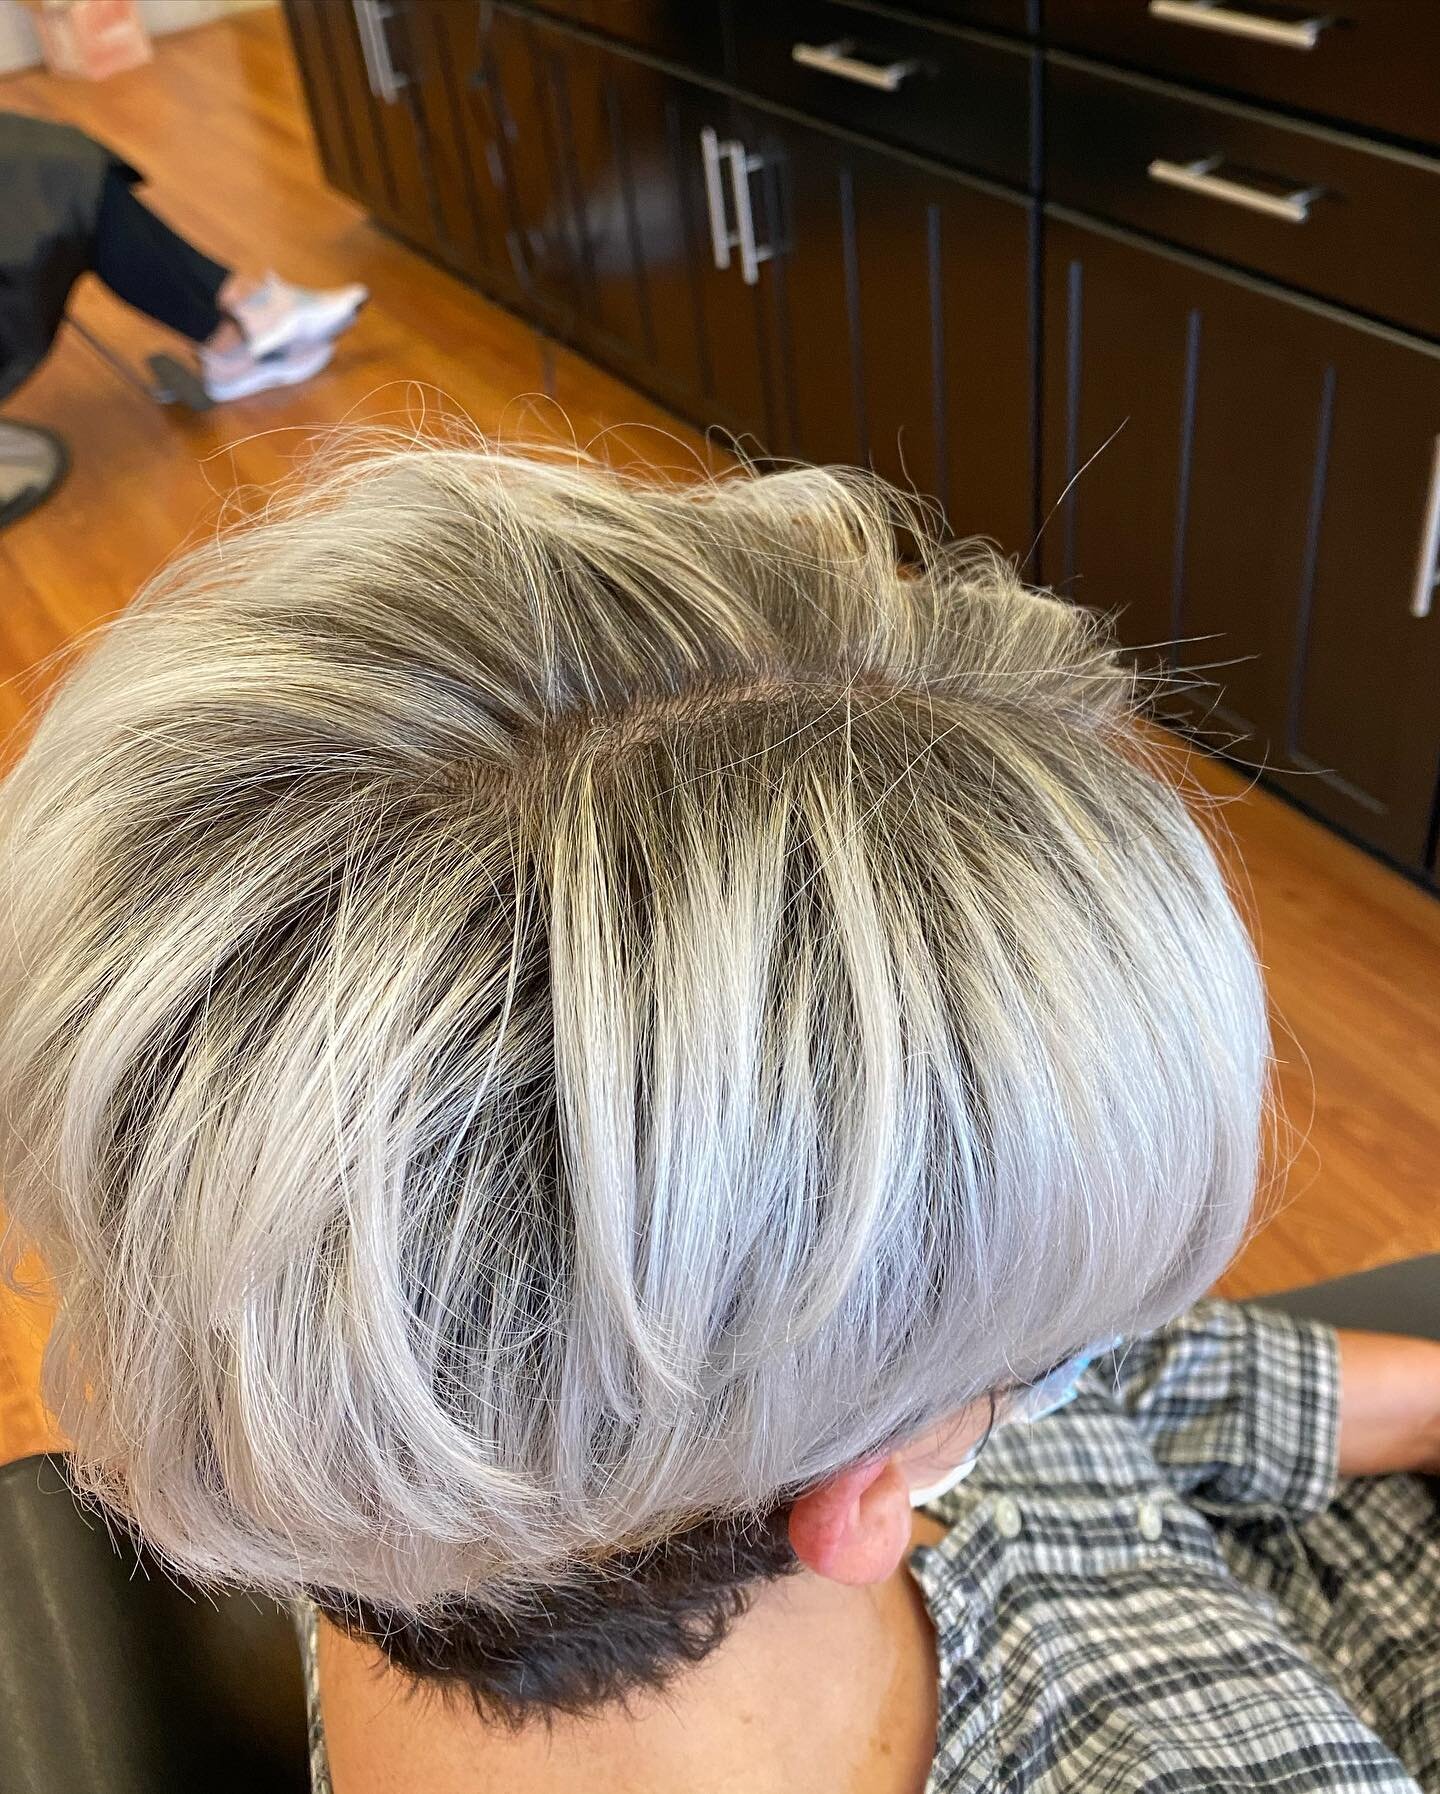 Full bleach &amp; tone touched-up with #babylights for a softer grow out. 😎

Every client requires a unique approach. 

**It has been more than one process. 

Beautiful hair is part of a #lifestyle 

#colourbarlc #effortlesschic #effortlessstyle #co